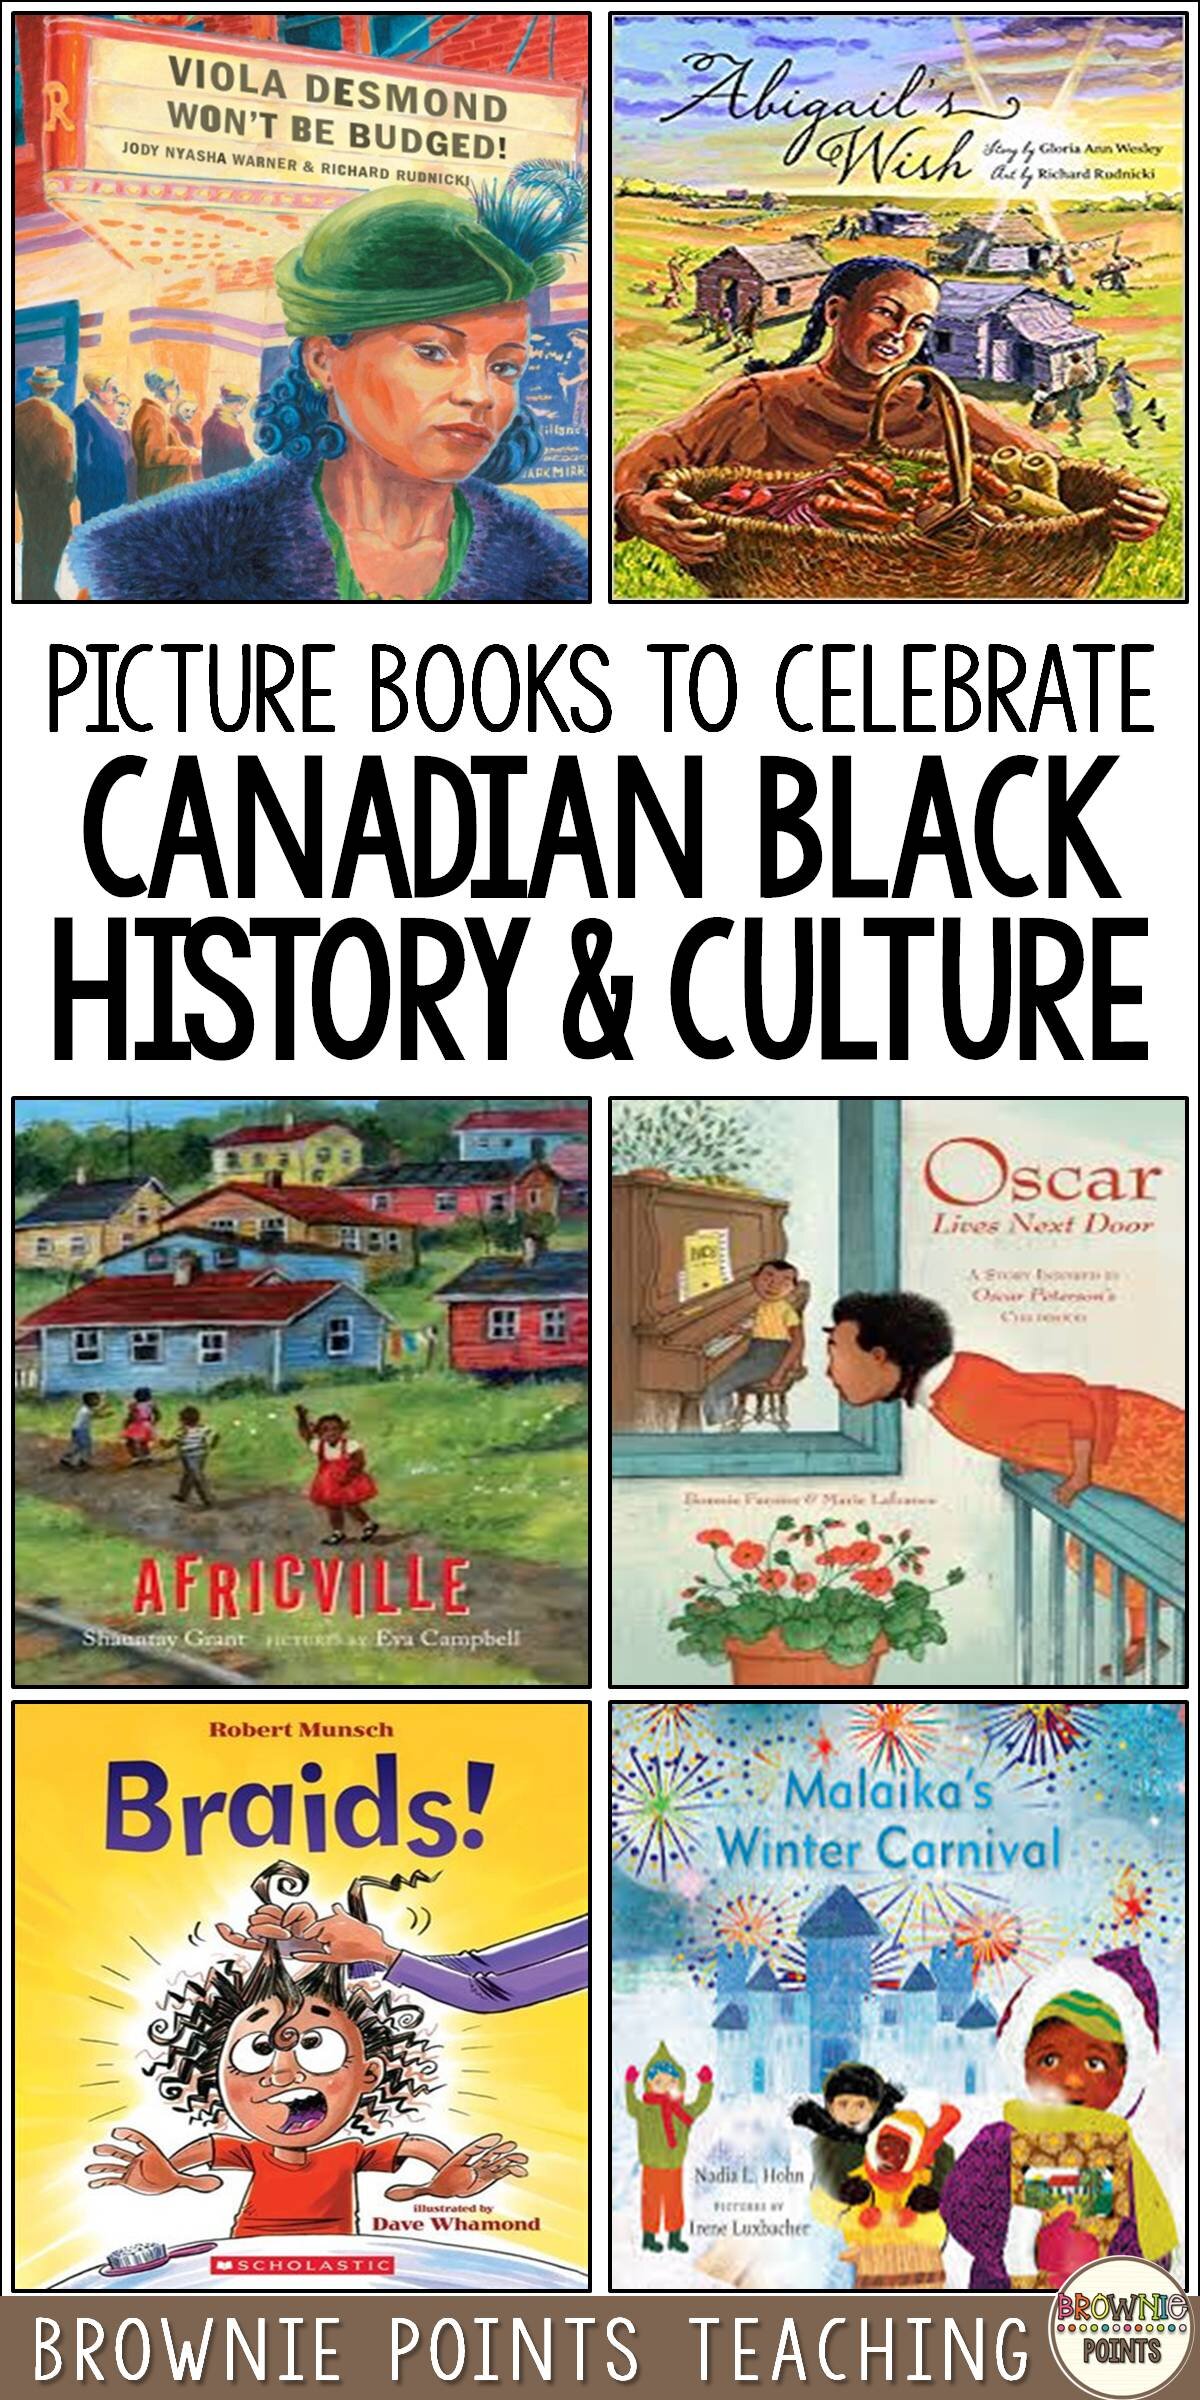 The Kids Book of Black Canadian History 